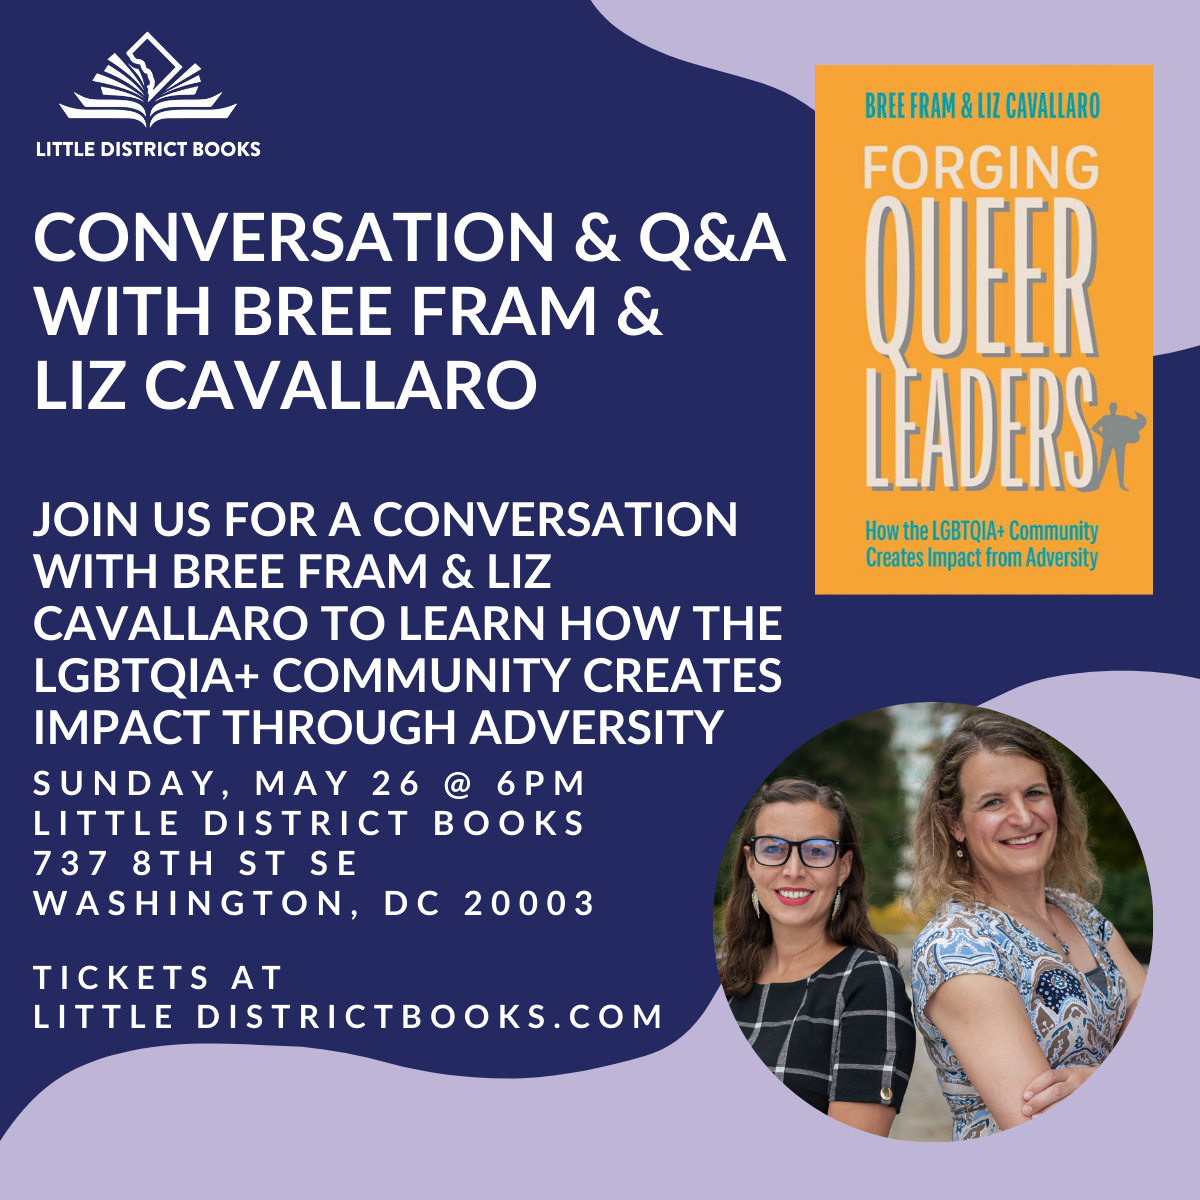 Conversation and Q&A with Bree Fram and Liz Cavallaro